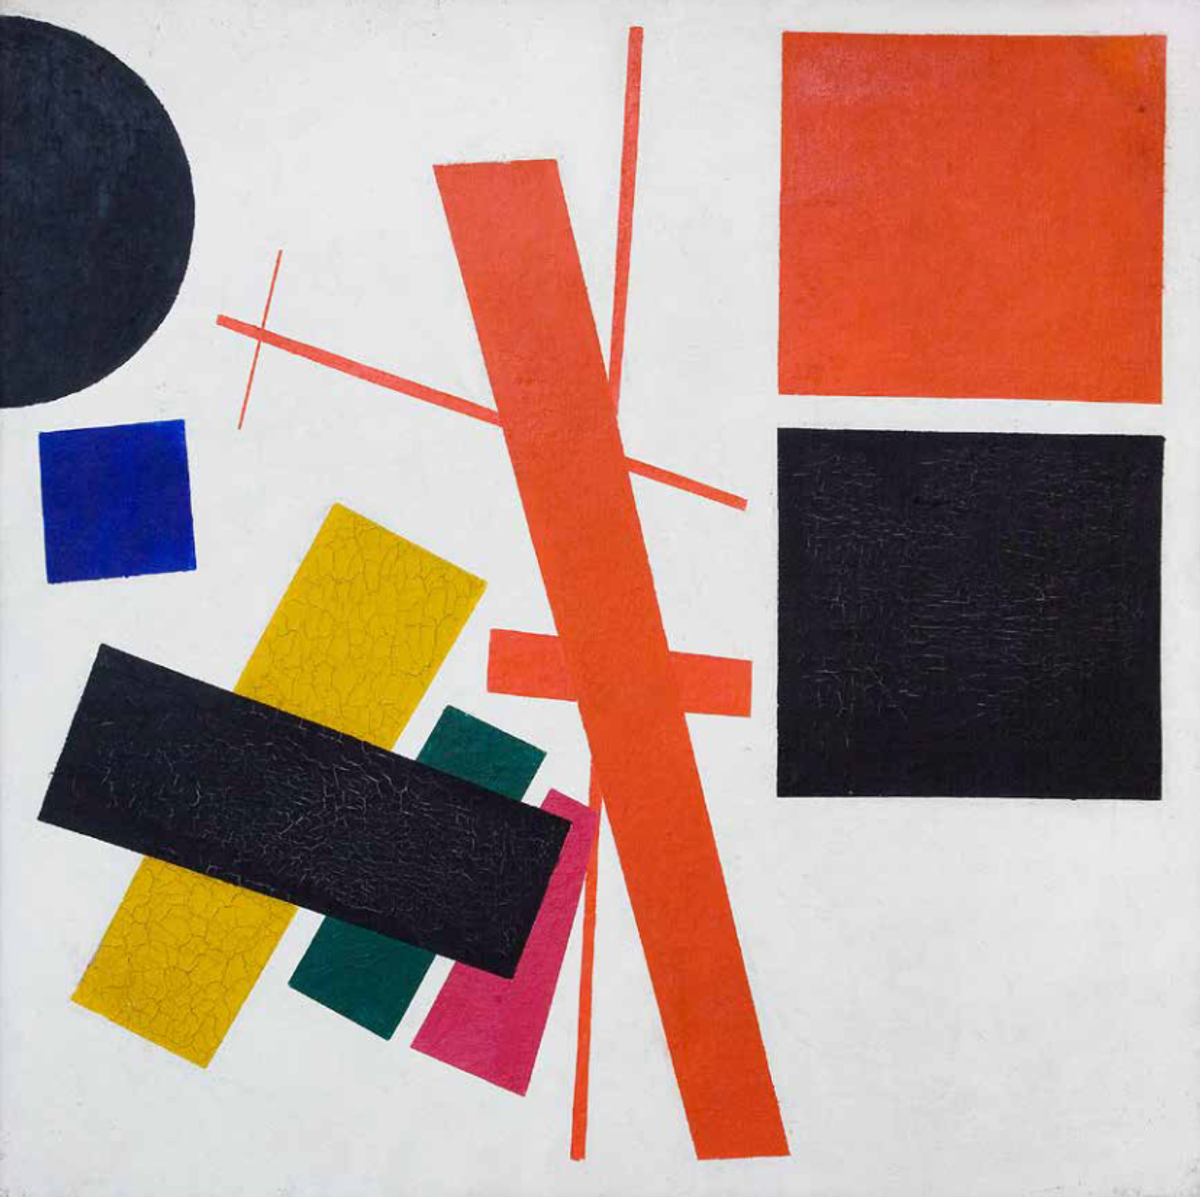 Kazimir Malevich’s Suprematism (1915) on loan from the Ekaterinburg Museum of Fine Arts